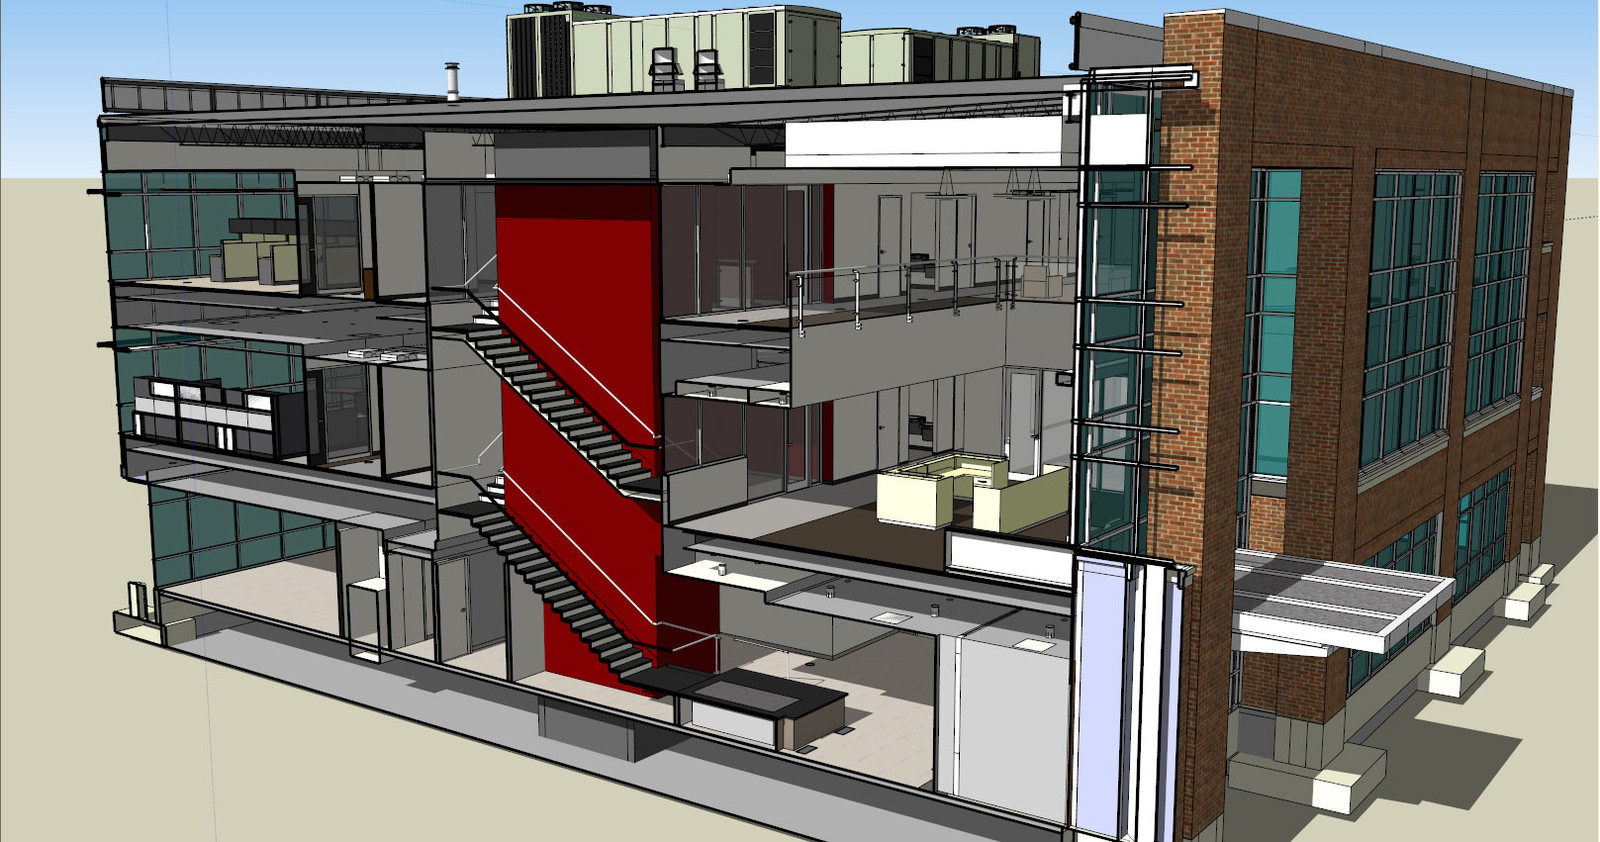 Cutway image of the ATP building created in SketchUp.